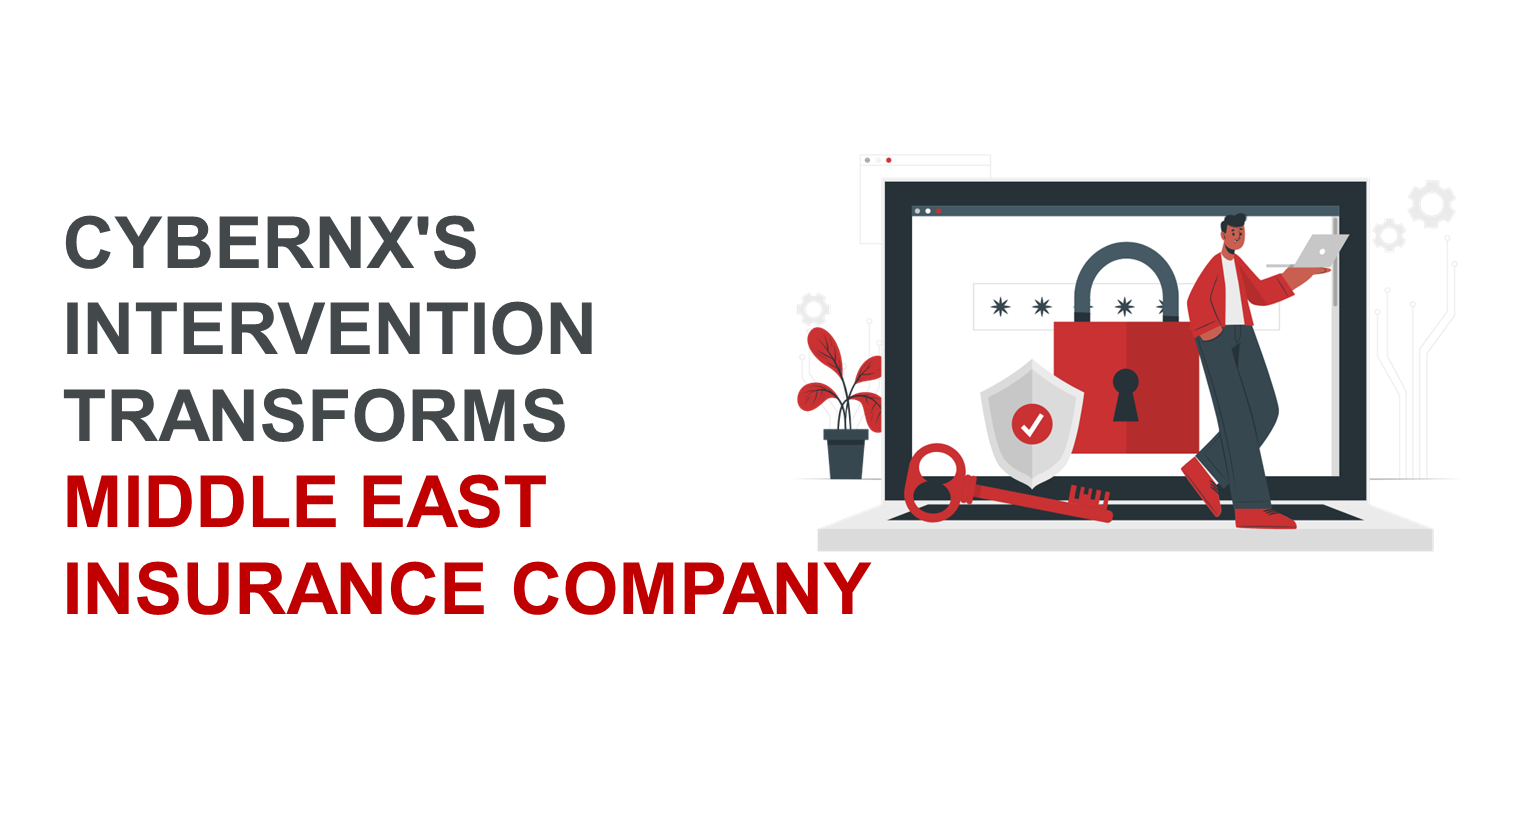 CyberNX's Intervention Transforms Middle East Insurance Company